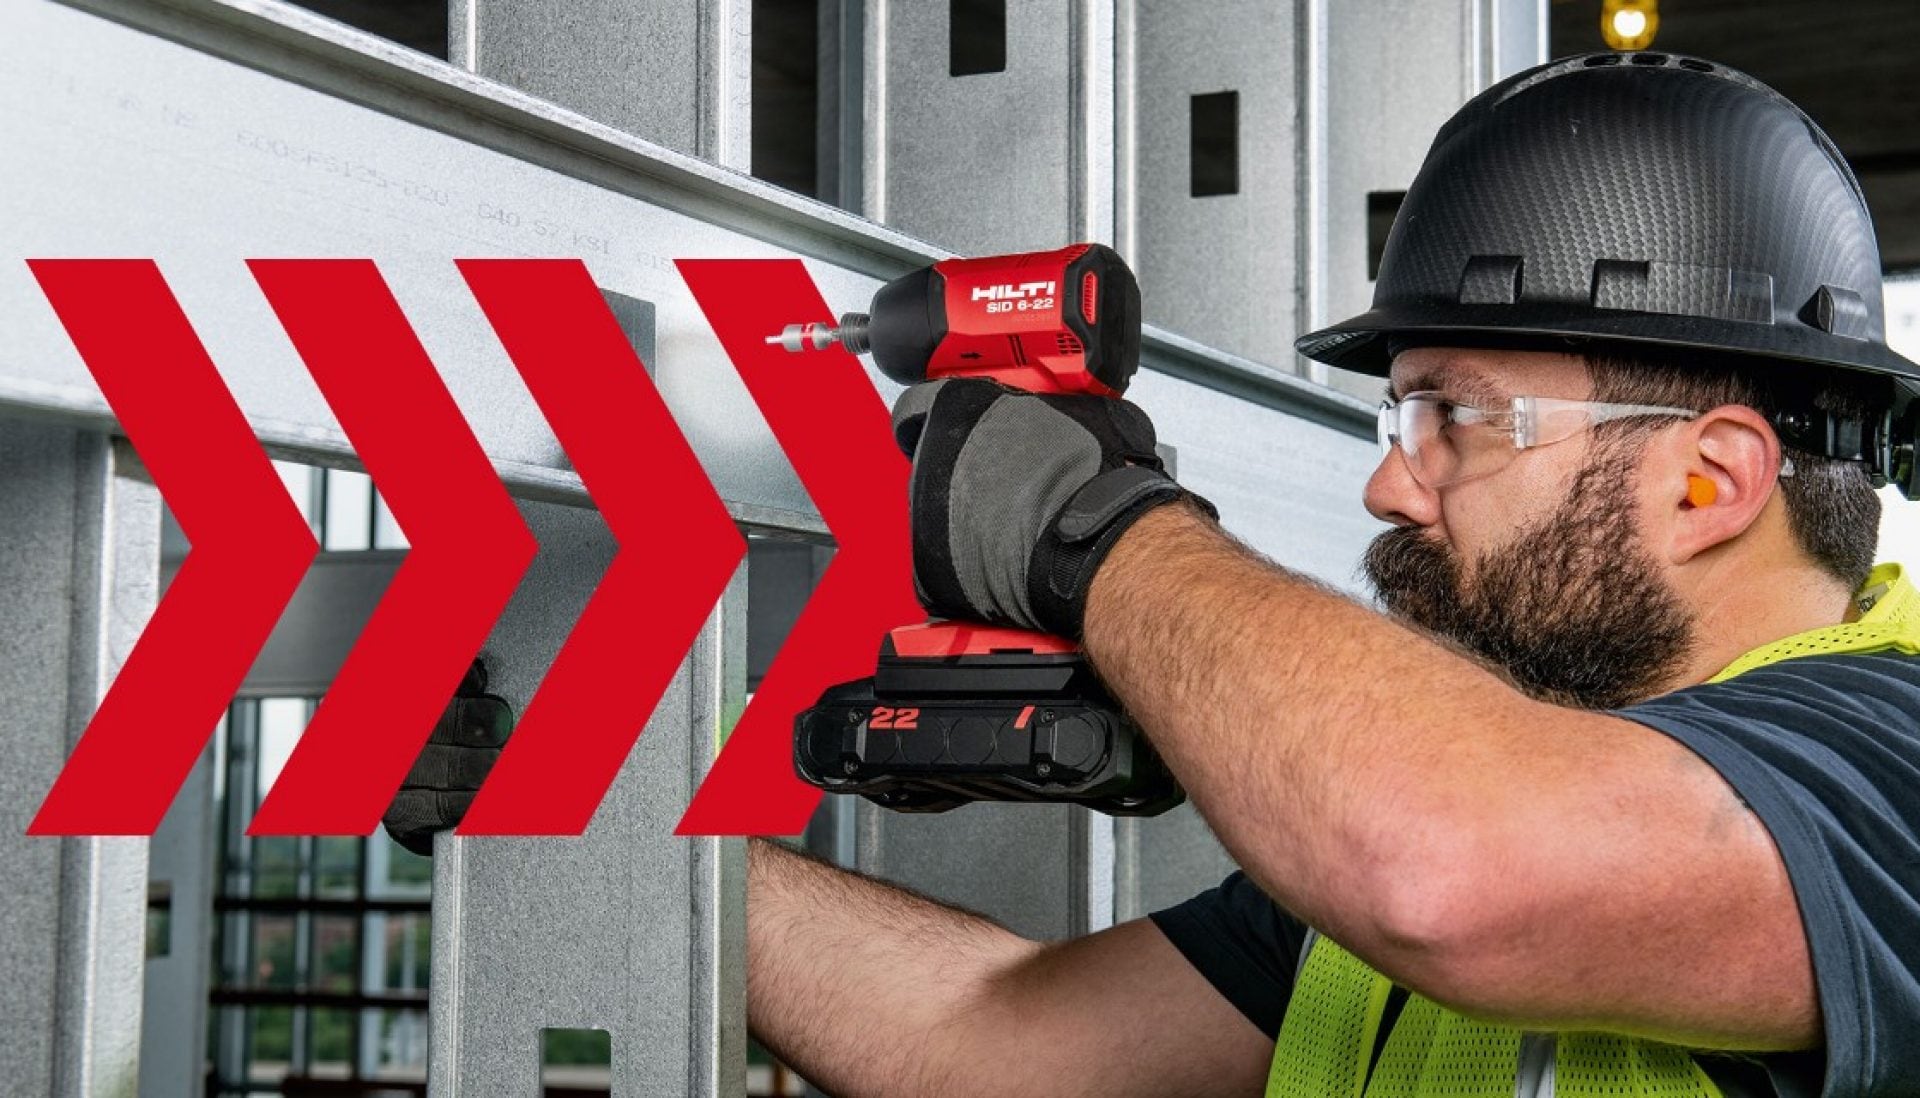 A person is working with the Hilti Nuron SID 6-22 cordless impact driver and a B22-55 Nuron battery.